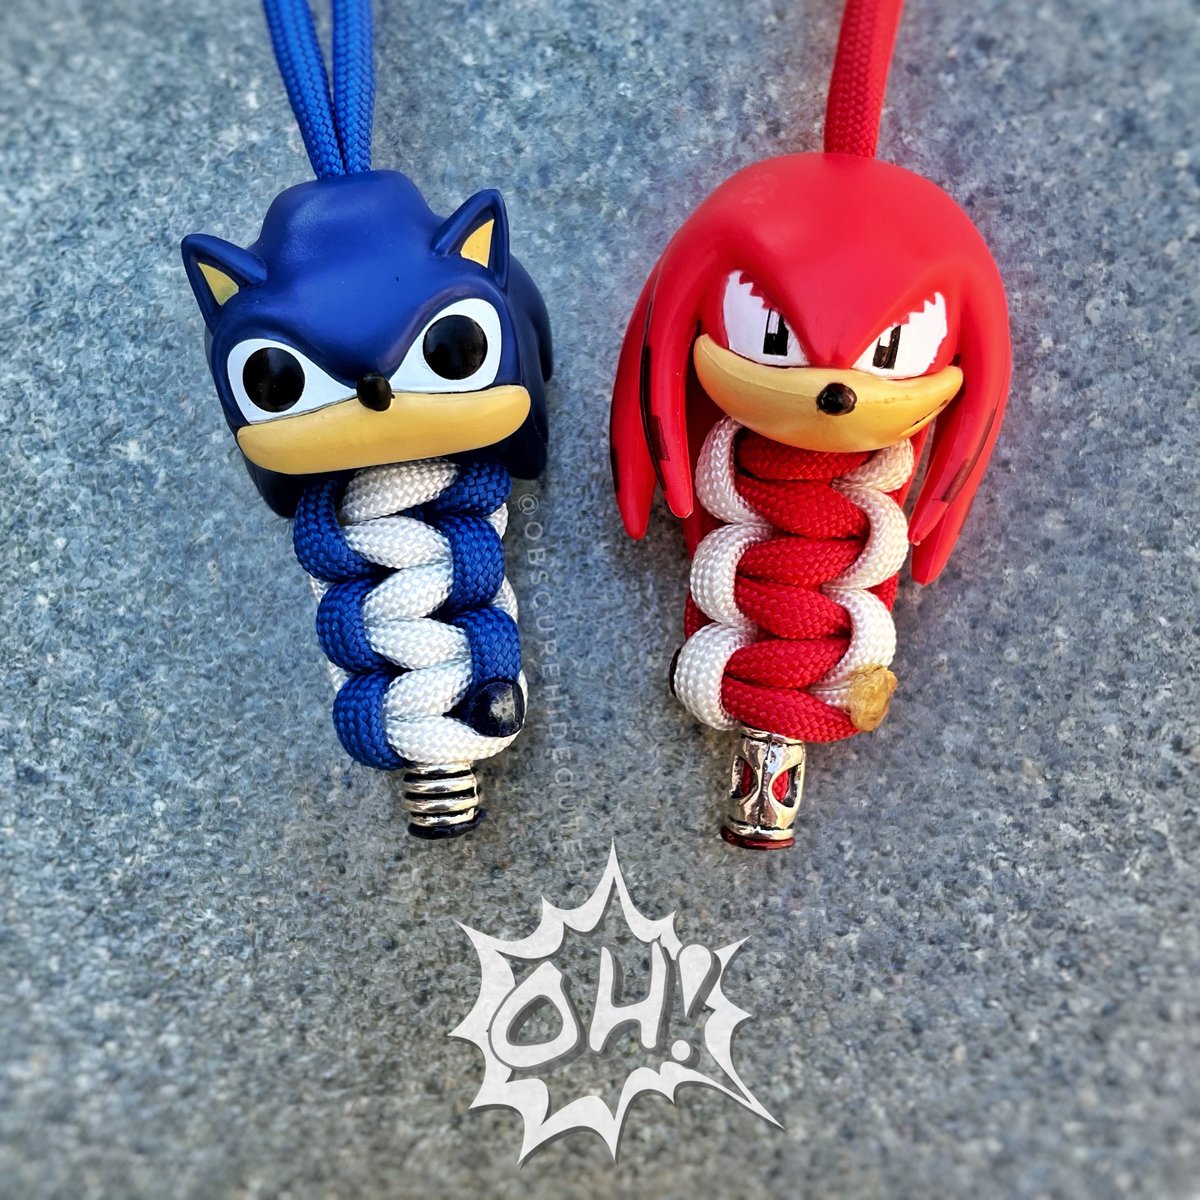 Image of Sonic the Hedgehog & Knuckles 